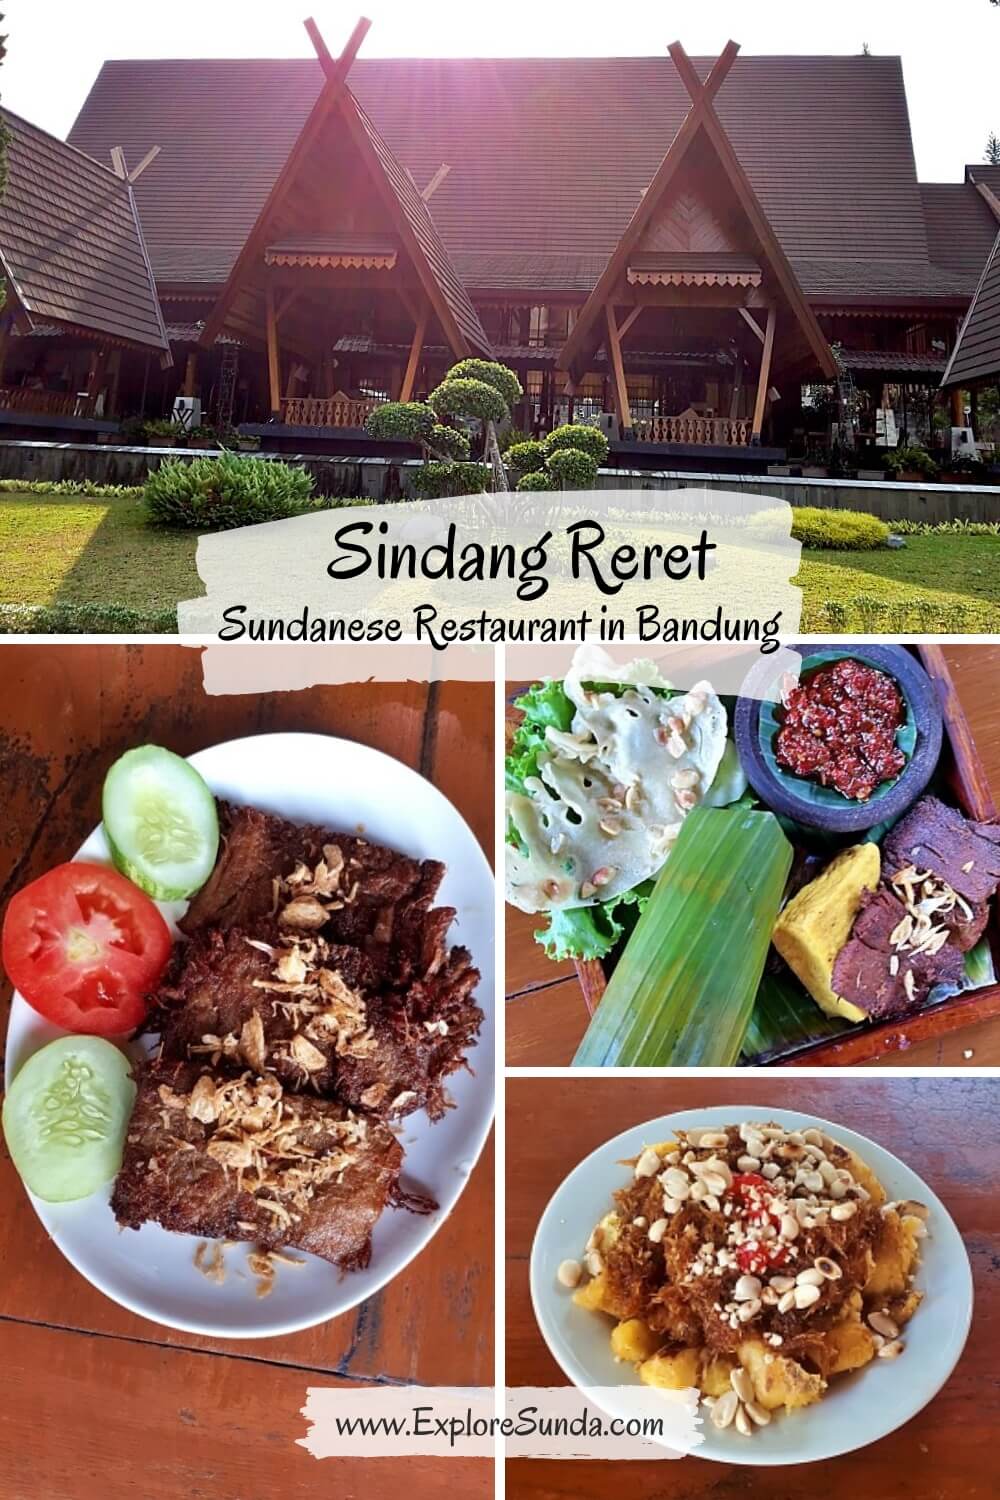 The Best Sundanese Restaurant in Bandung and Their Special Menu